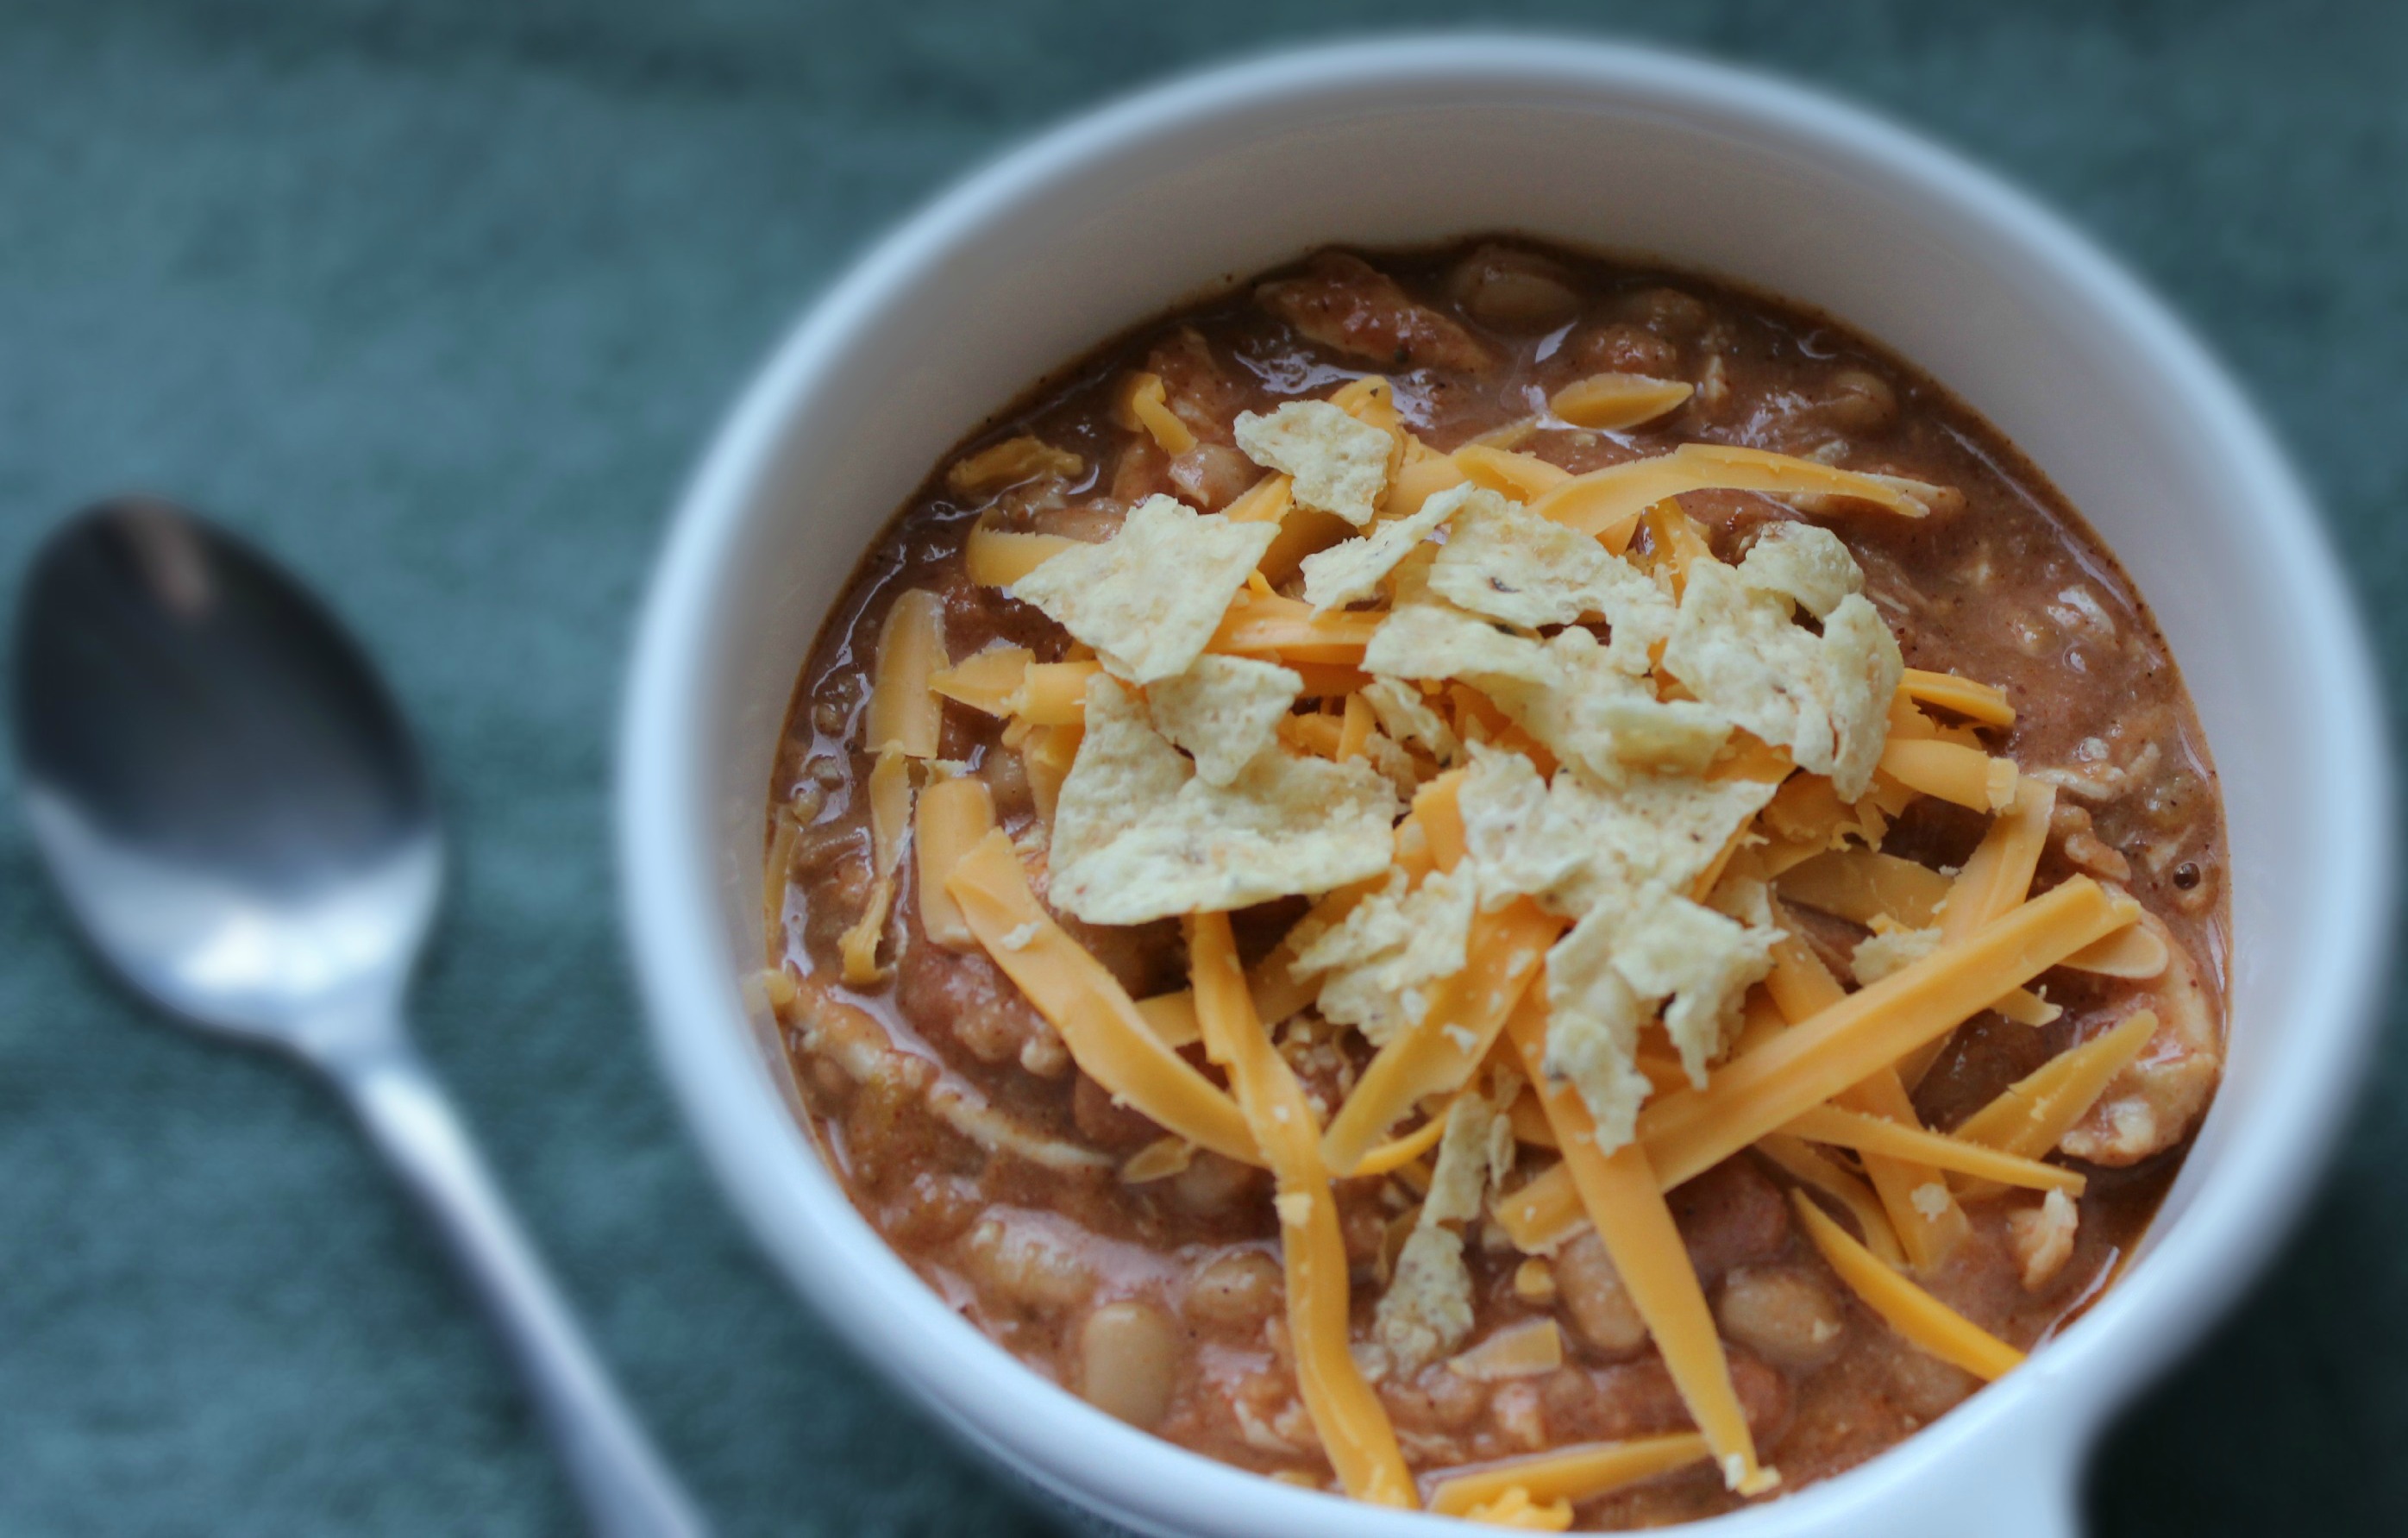 Southwest Chicken Chili in the Crock Pot